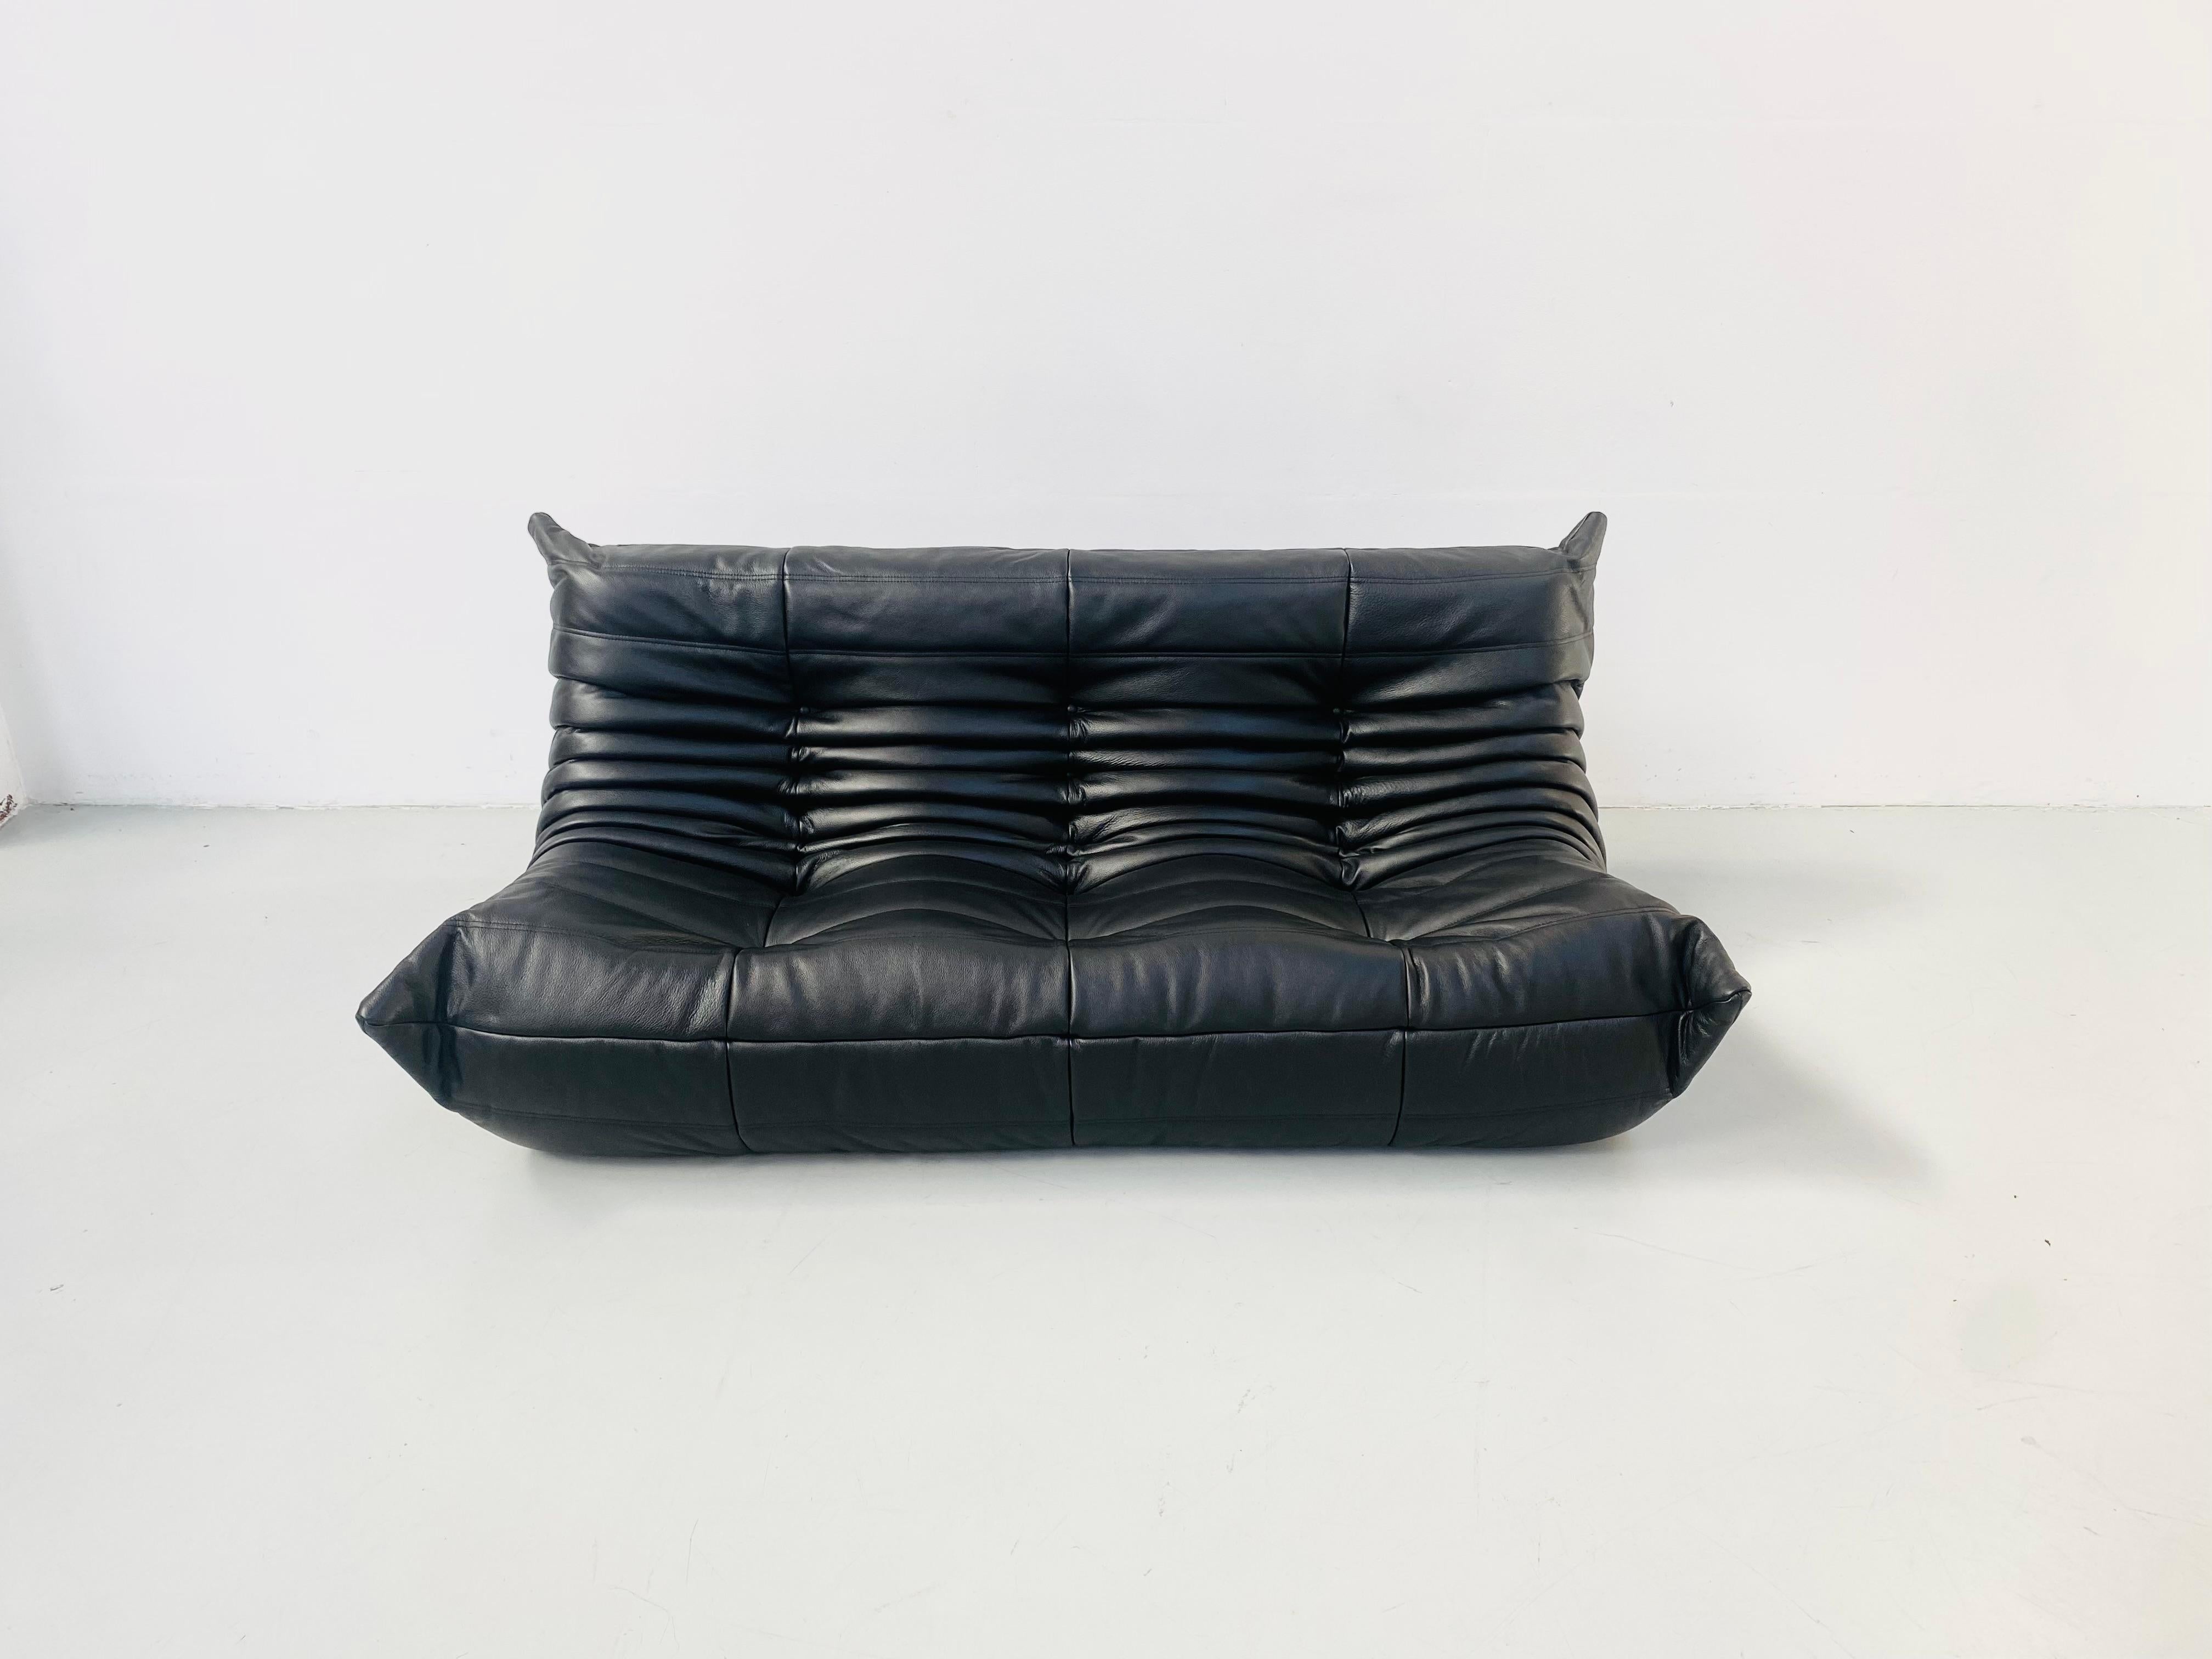 French Togo Sofa in Black Leather by Michel Ducaroy for Ligne Roset. In Excellent Condition For Sale In Eindhoven, Noord Brabant